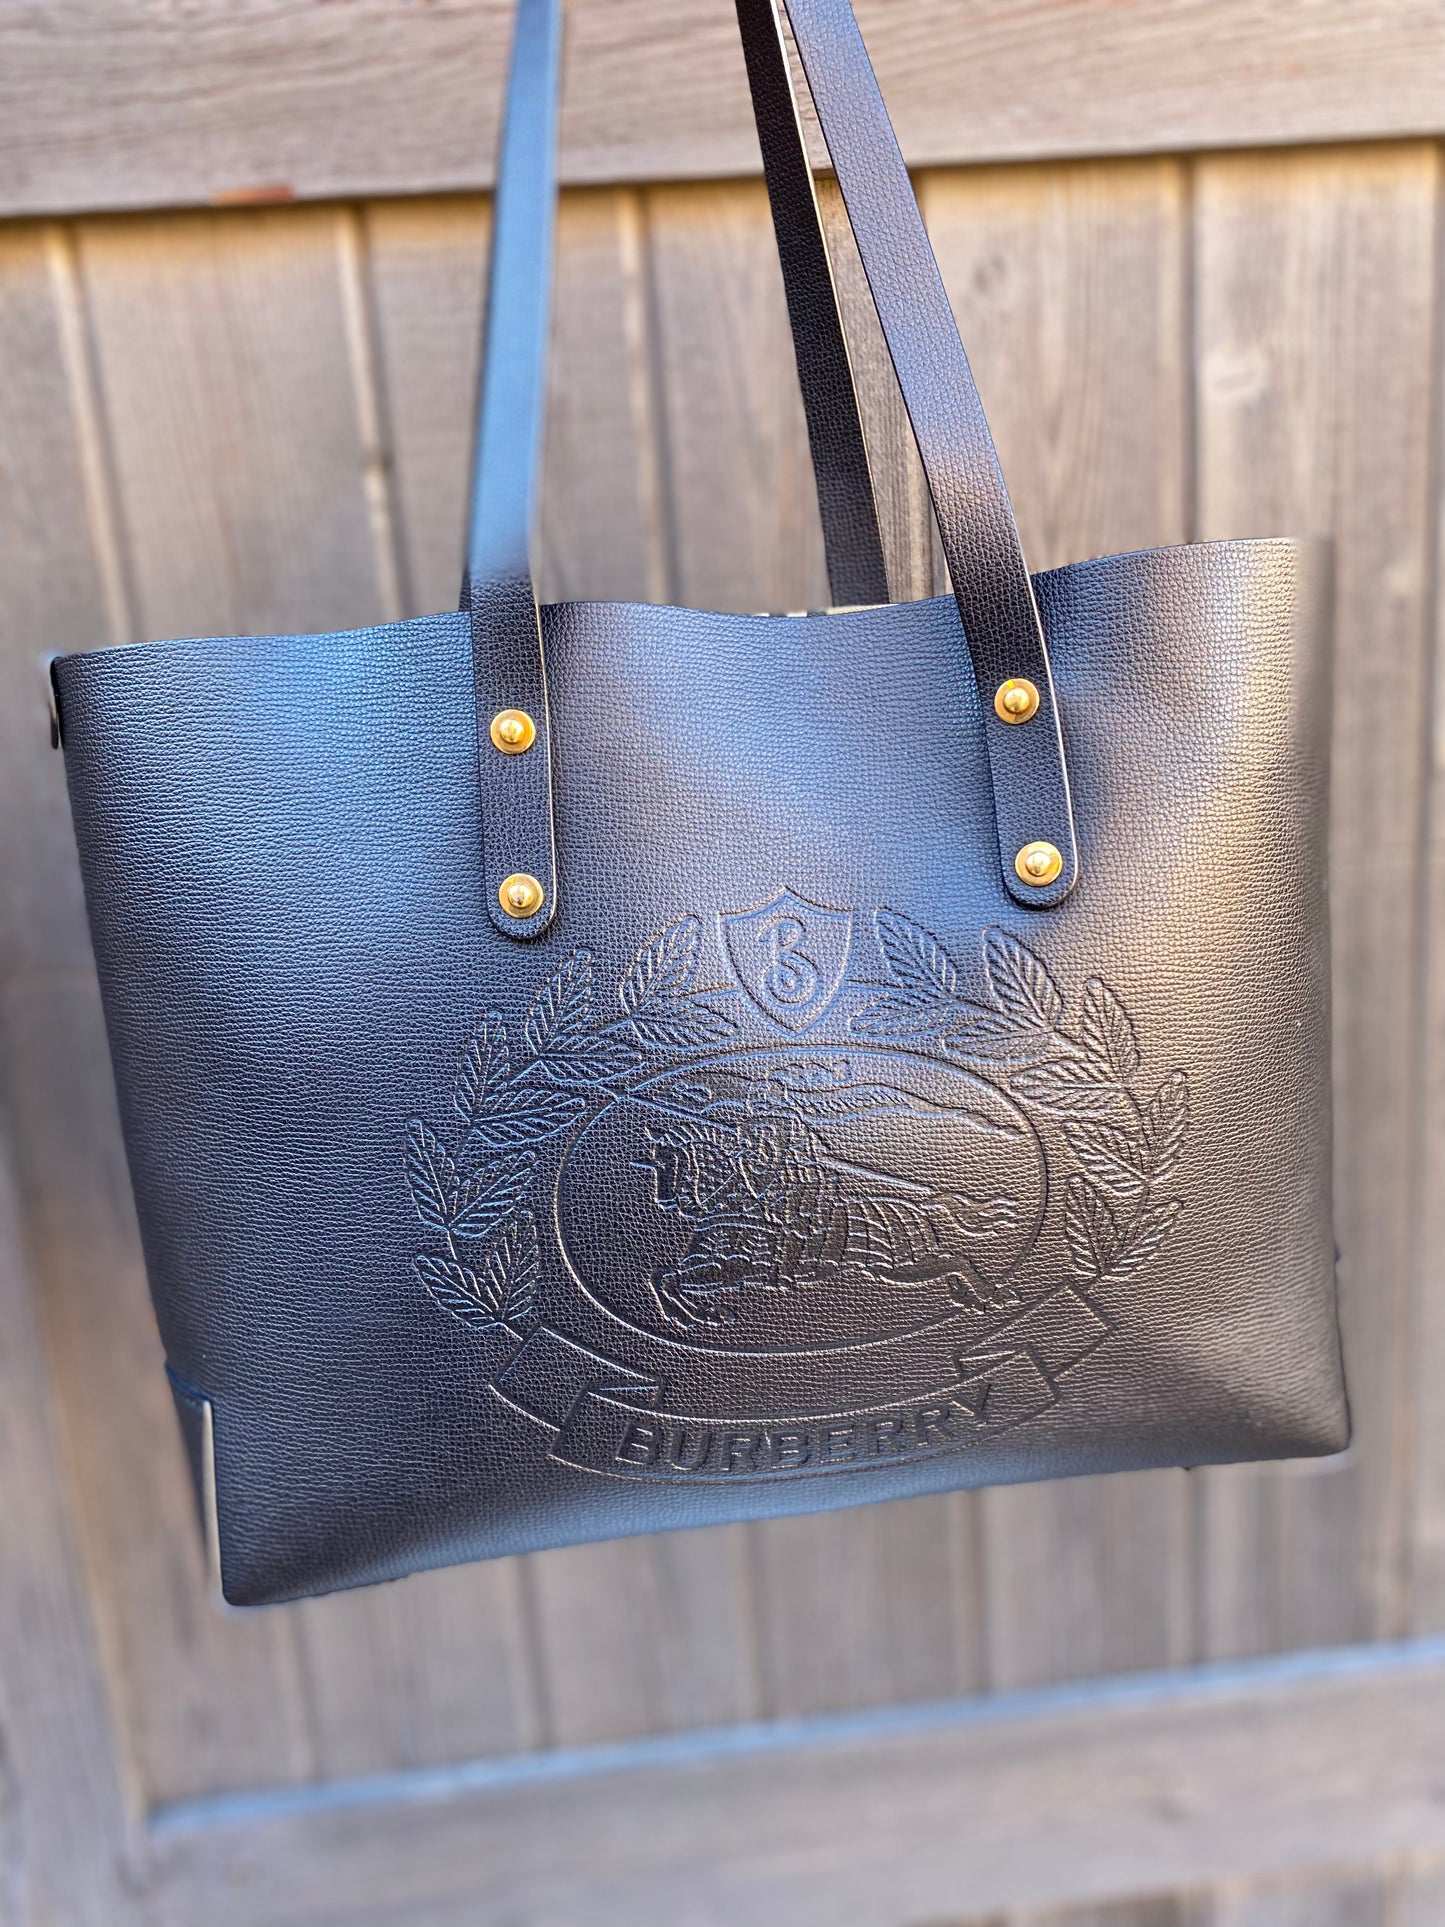 Burberry Embossed Crest Leather Shopping Tote